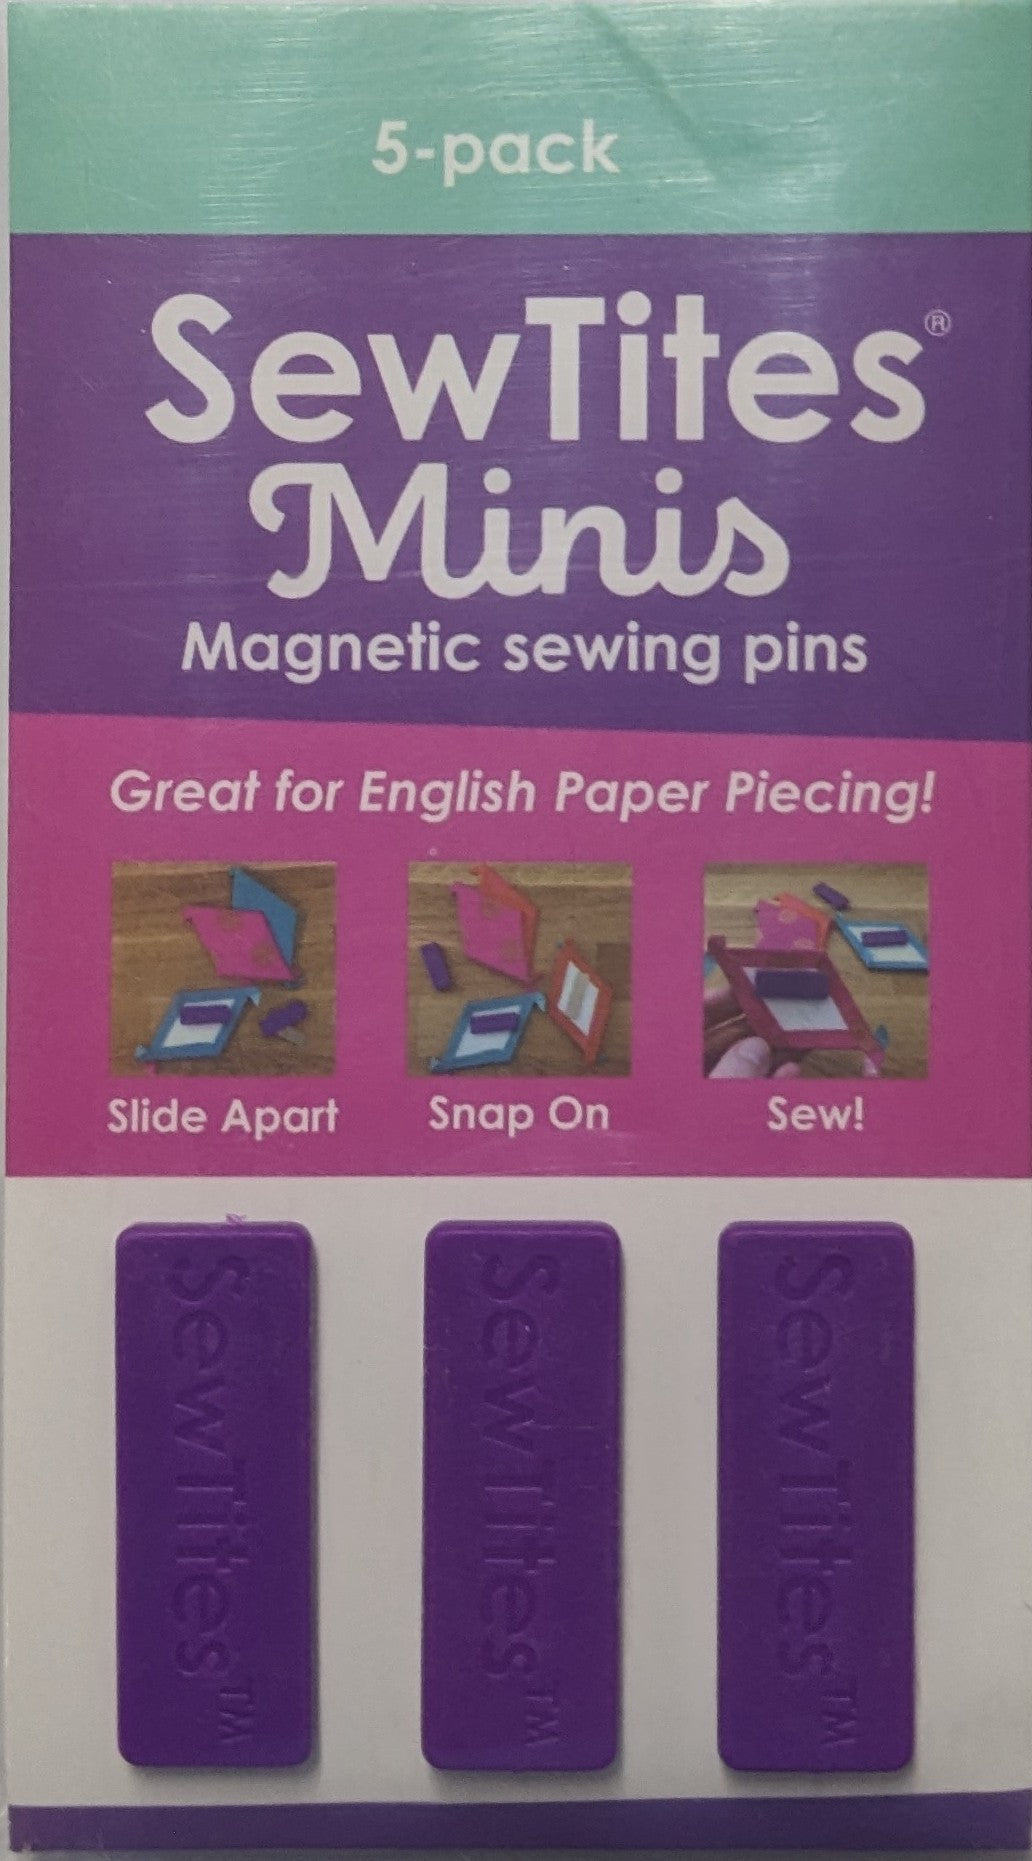 SewTites Minis Magnetic Sewing Pins